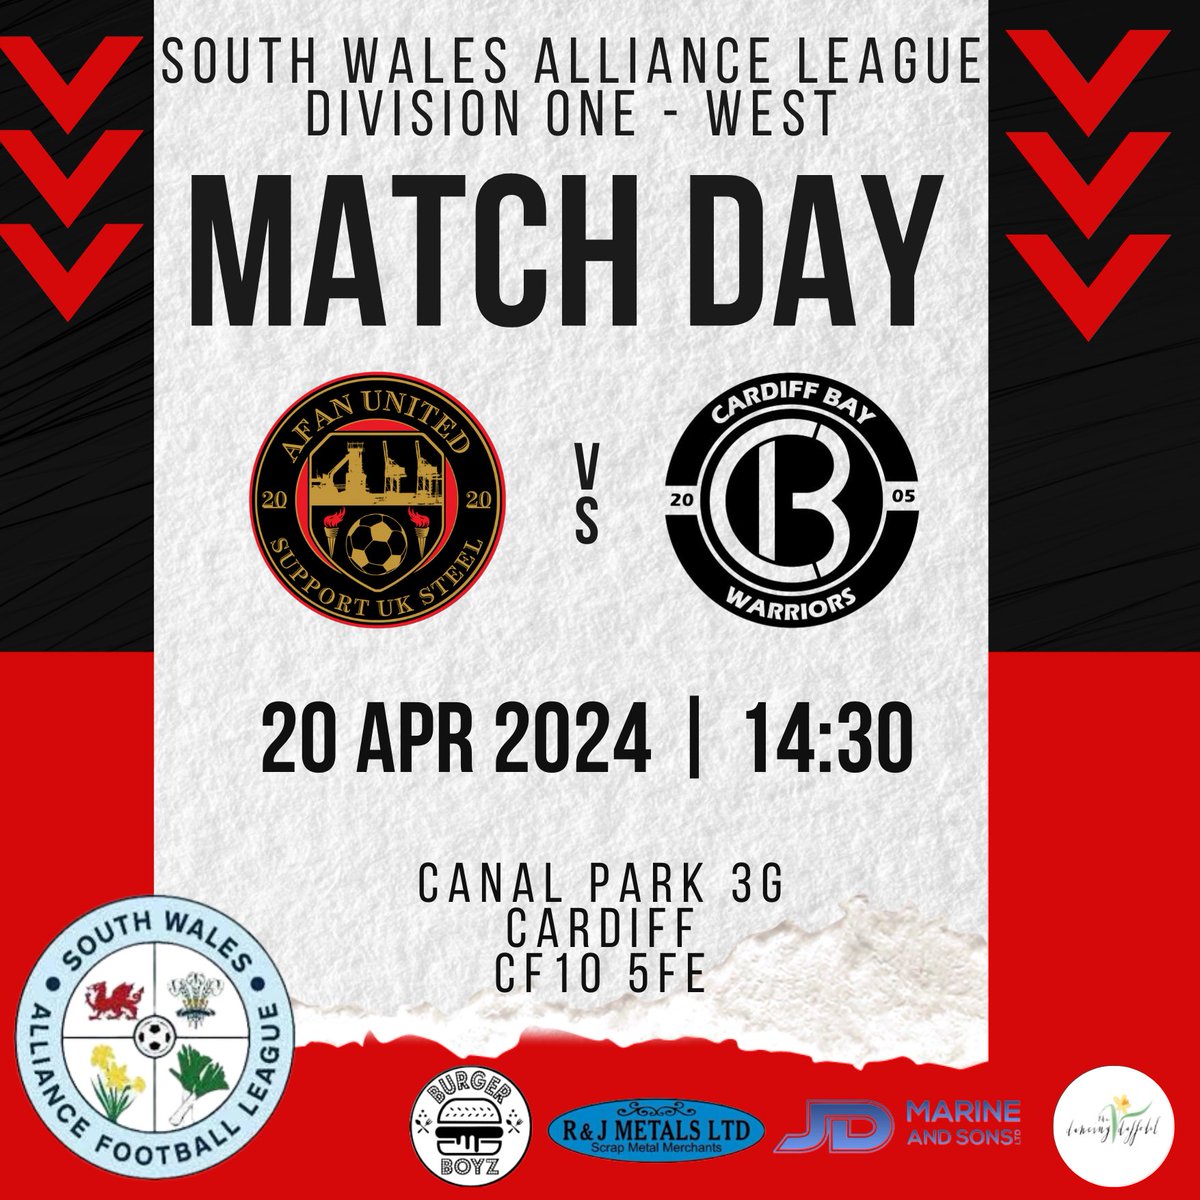 Top of the table clash this afternoon away to @WarriorsCardiff Both sides looking for important 3pts for a step closer to their promotion hopes